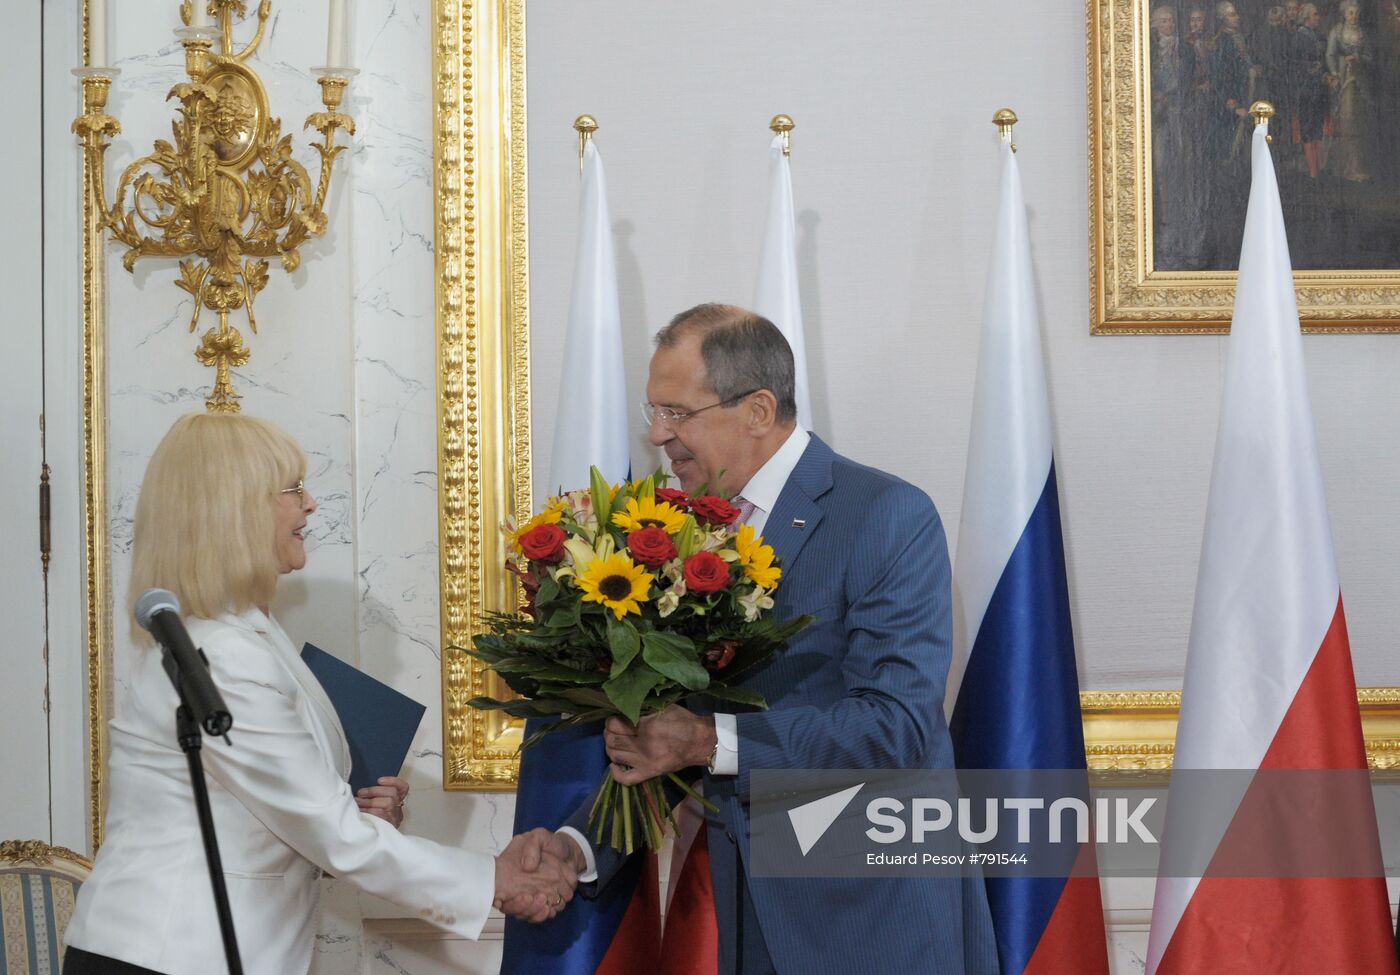 Russian Foreign Minister Sergei Lavrov visits Poland